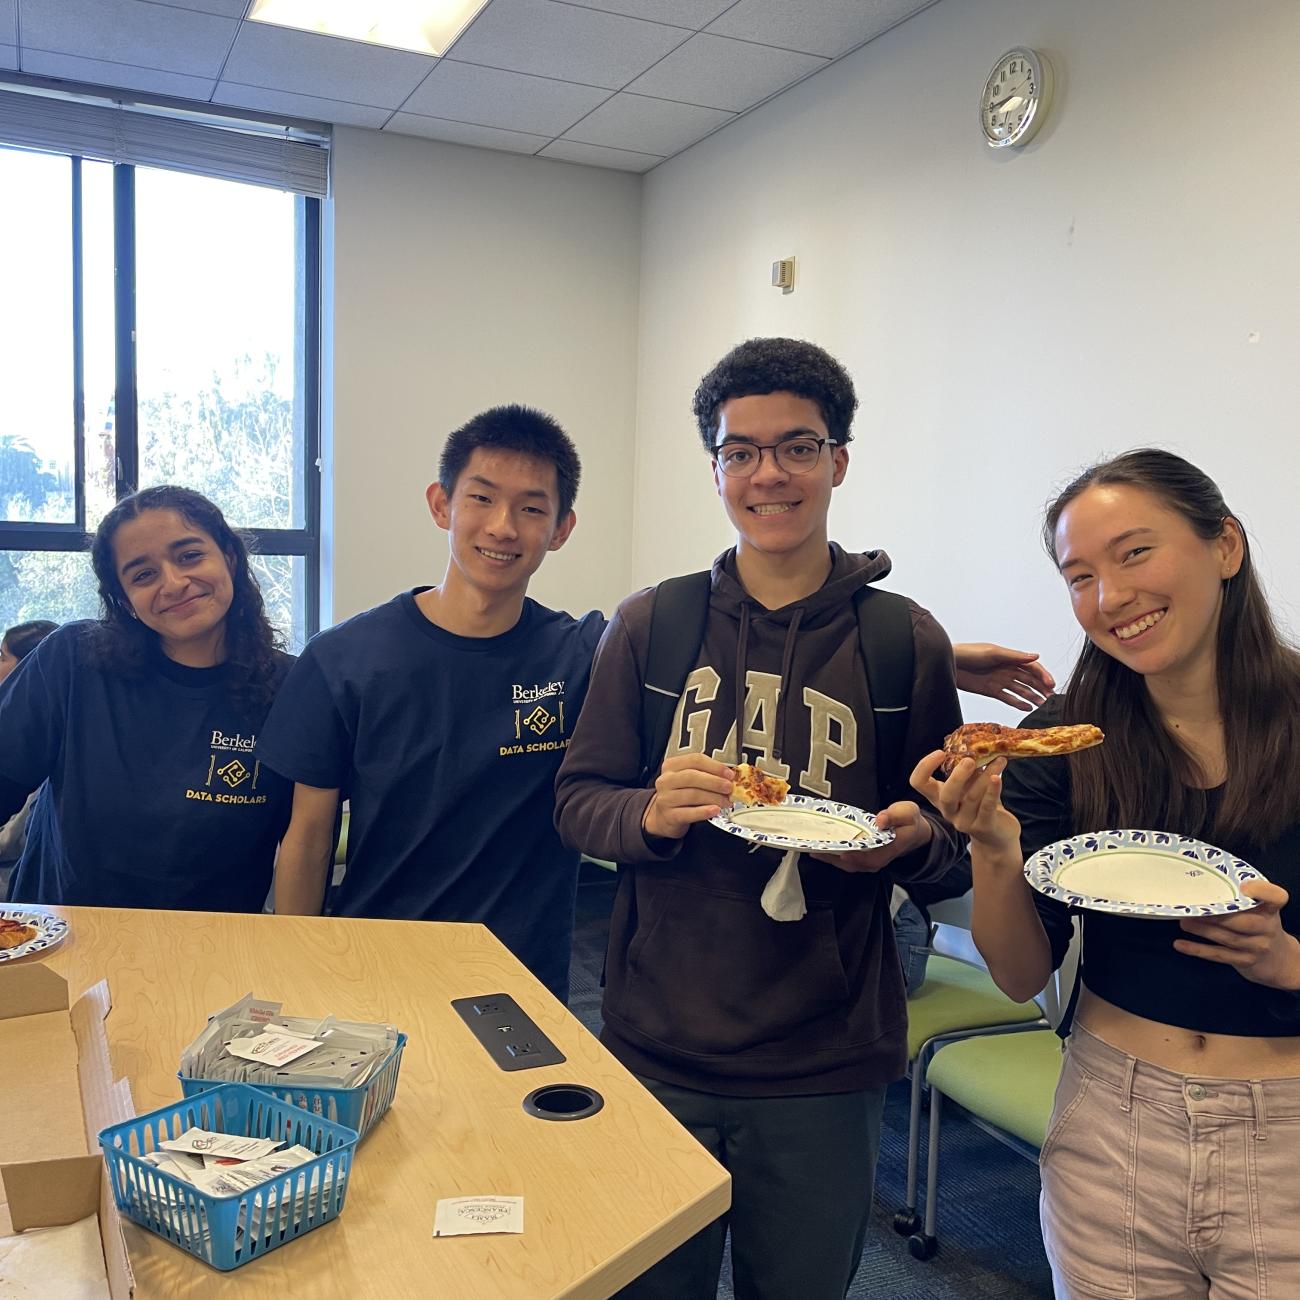 Four Data Scholars students, some holding paper plates with pizza slices, lean in toward each other and smile at the camera